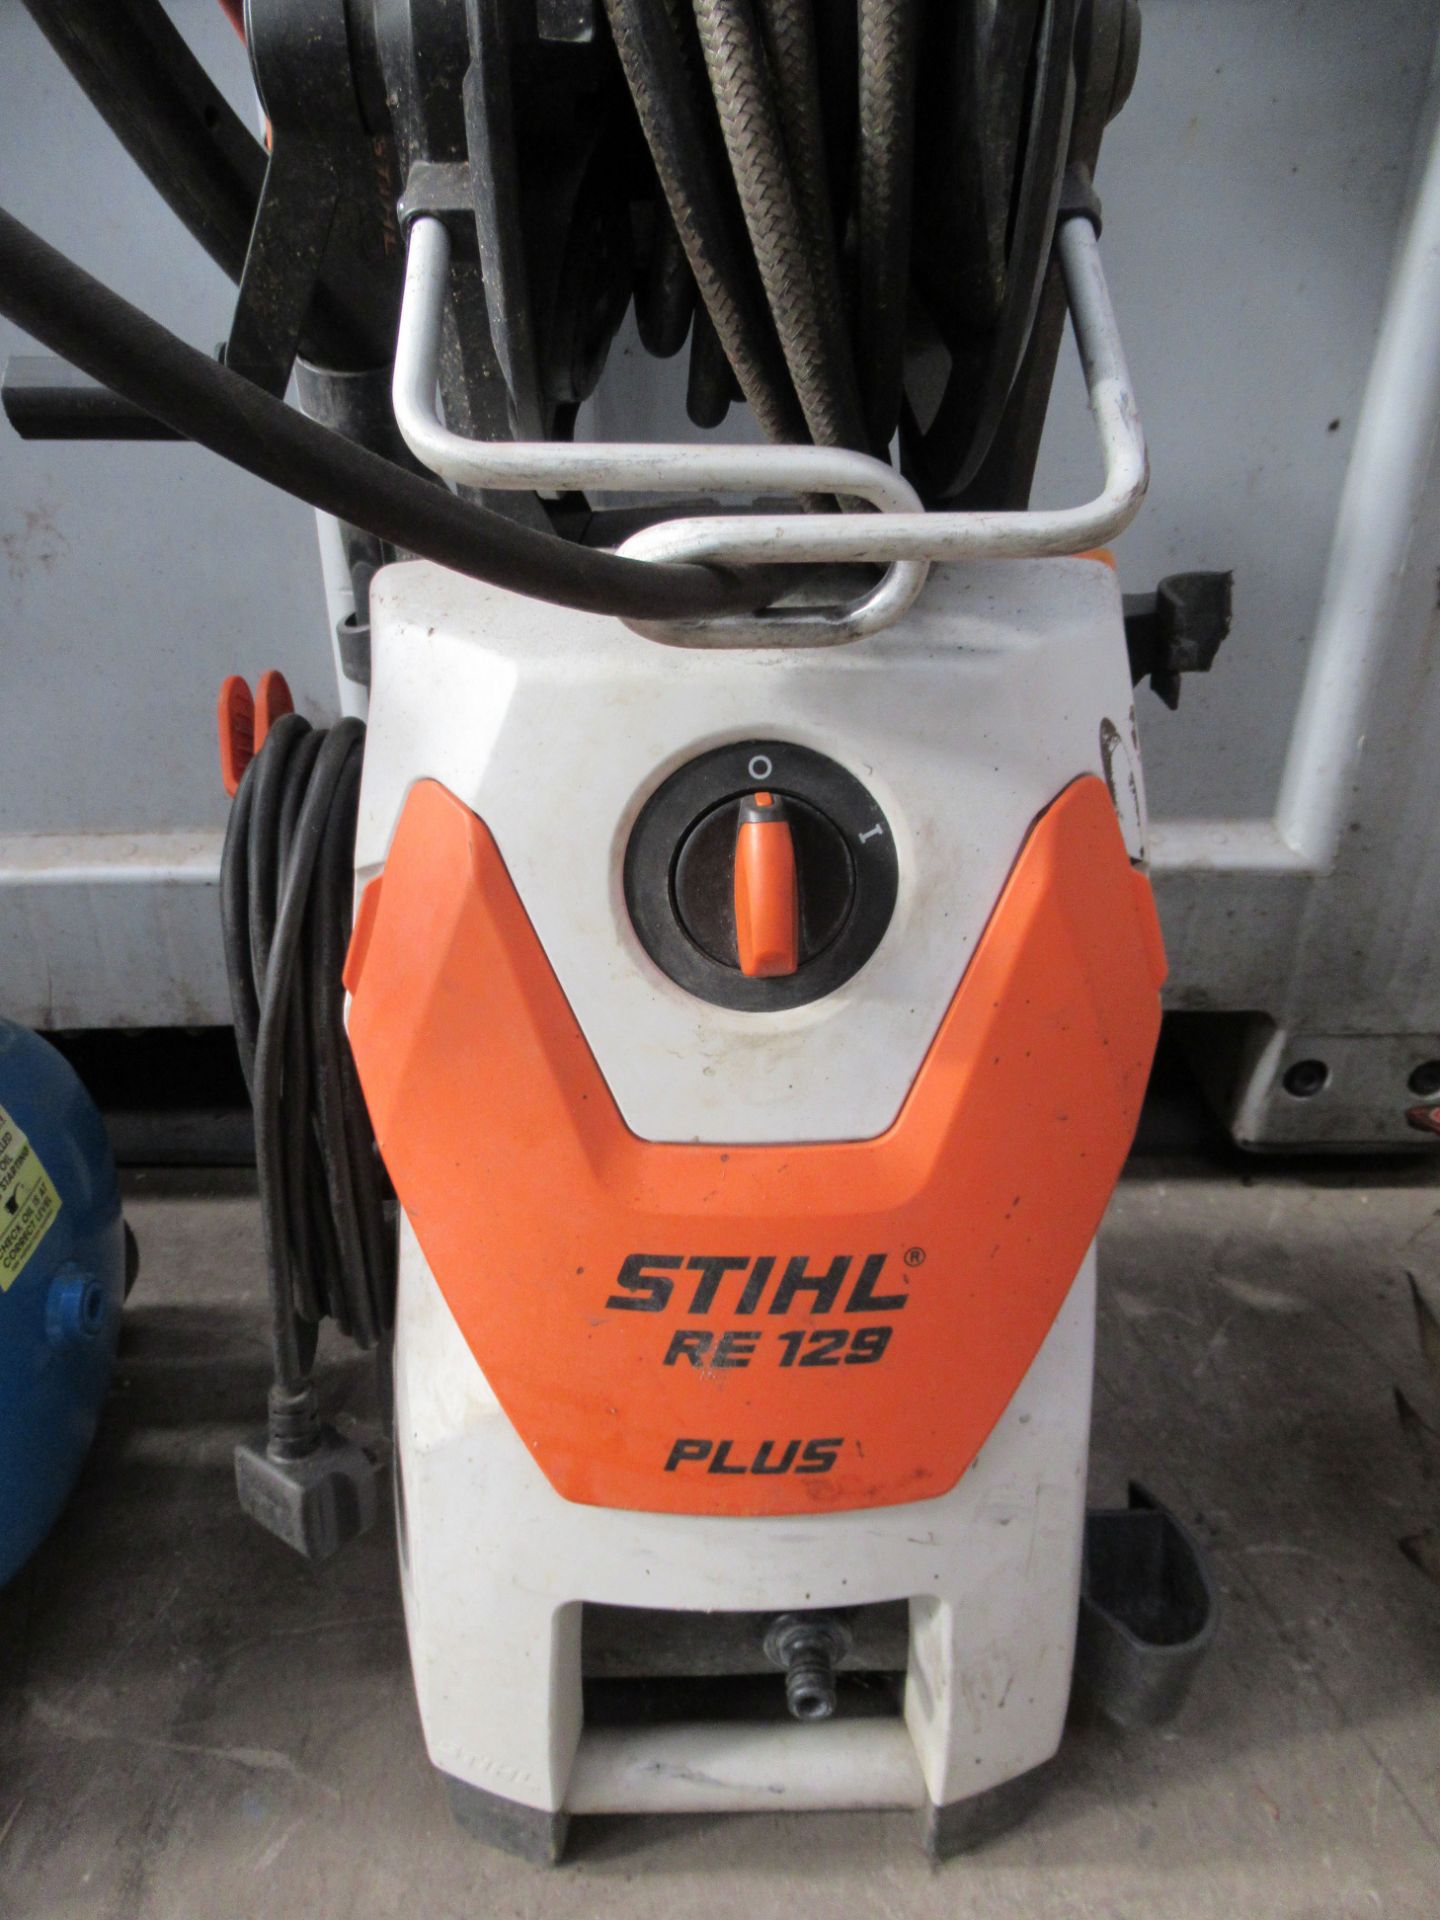 Stihl RE129 Plus Pressure Washer - spare or repairs - Image 2 of 3